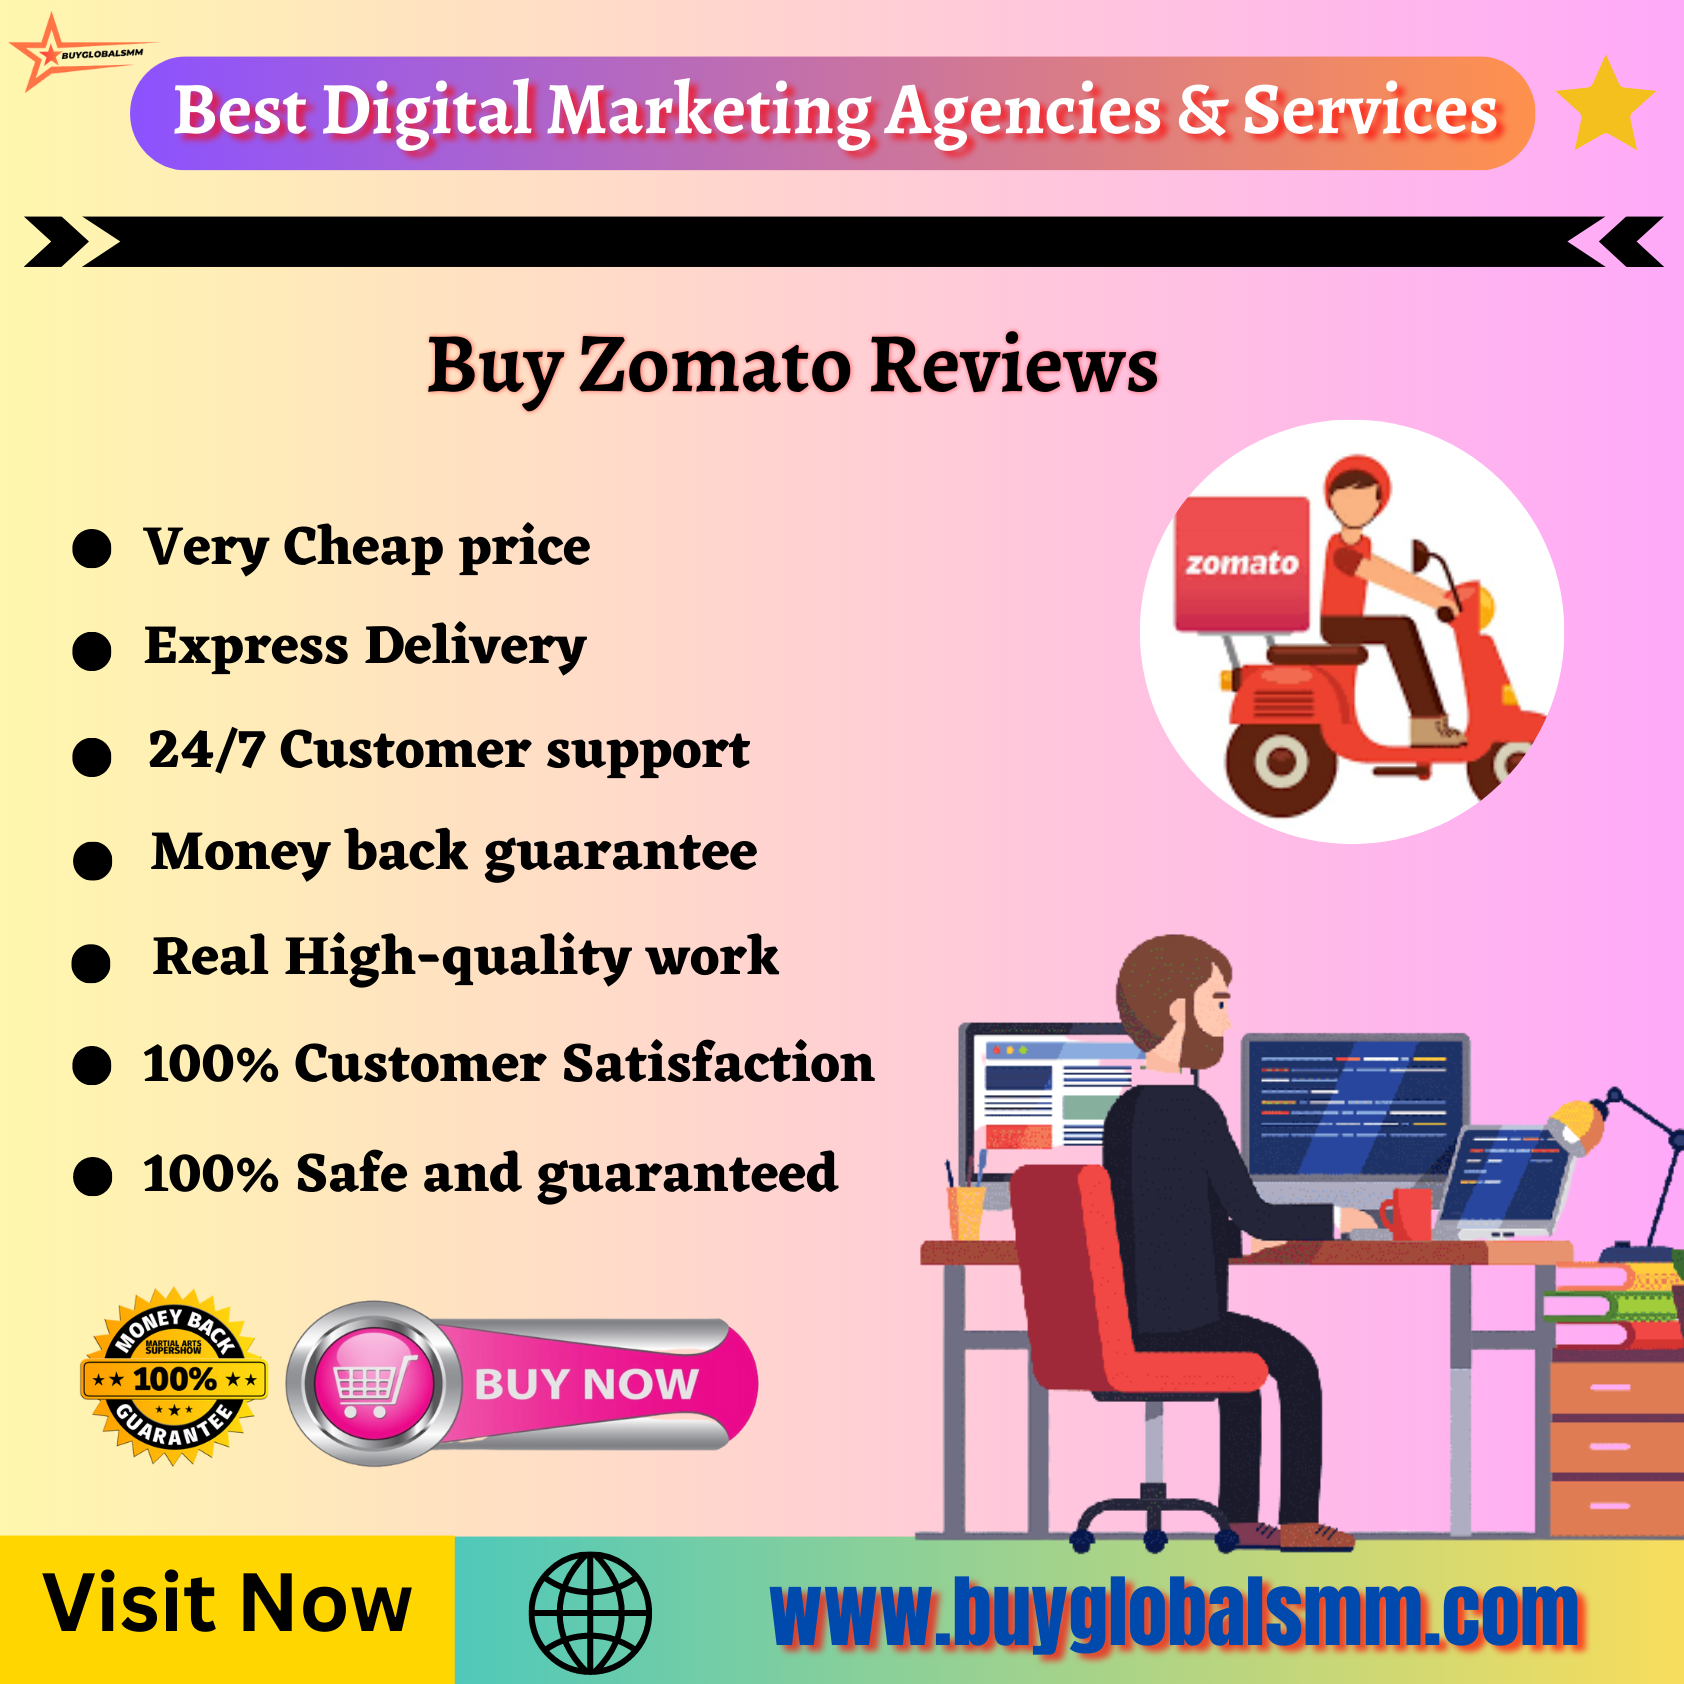 Buy Zomato Reviews-100% best, & permanent reviews...